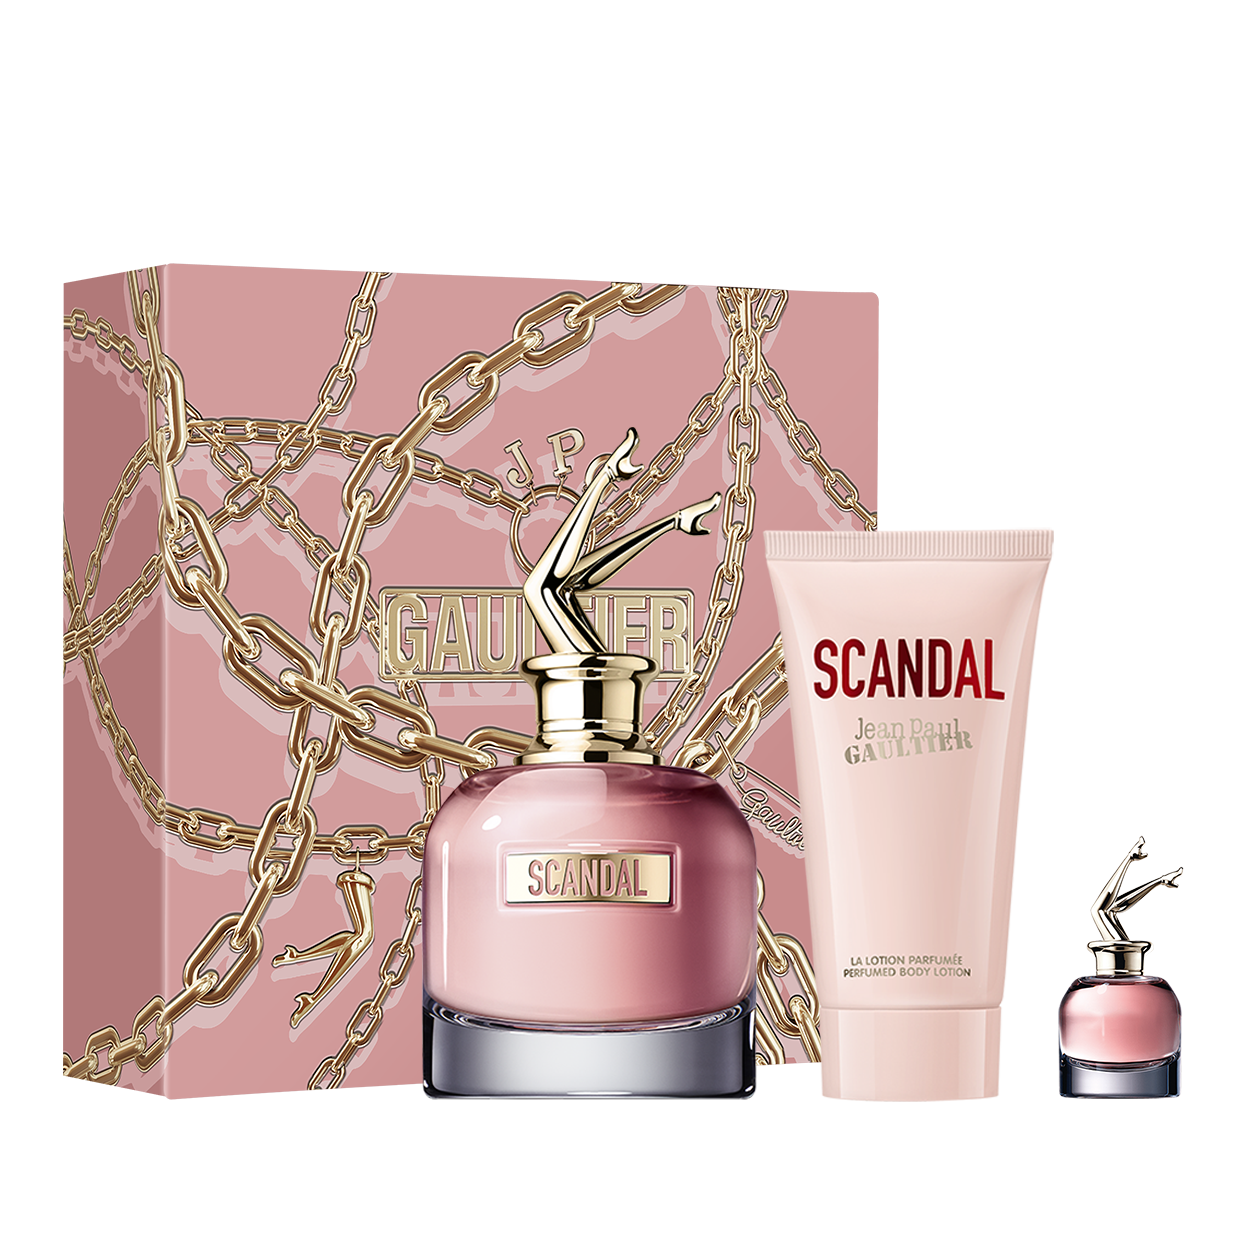 Scandal 80 ml, Body lotion 75 ml, and Miniature 6 ml